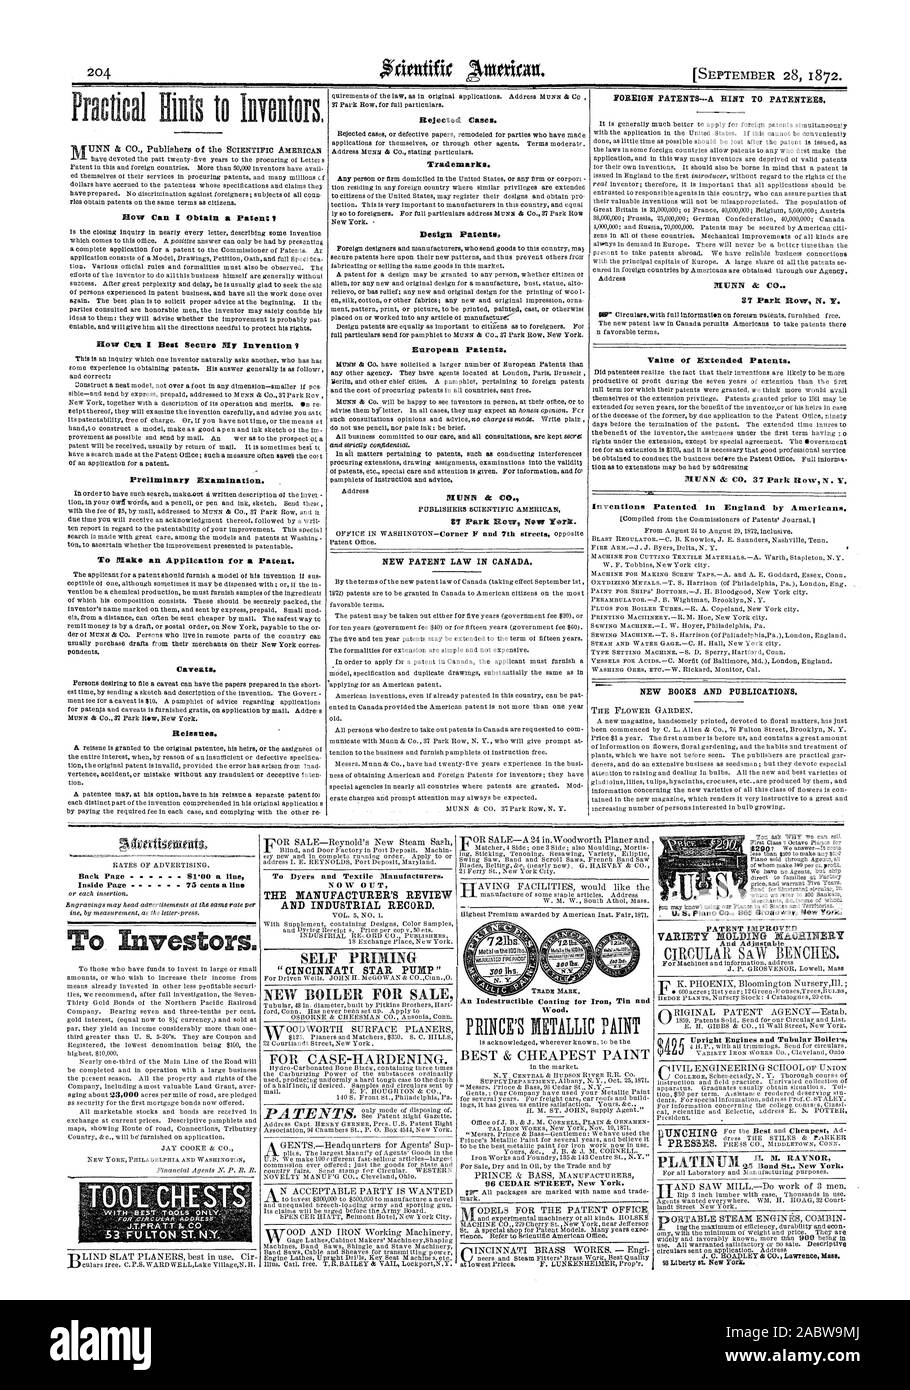 SEPTEMBER 28 1872. How Cam I Best Secure lily Invention Preliminary Examination. Caveats. Reissues. Rejected Cases. Trademark European Patents. Value of Extended Patents. Inside Page -  75 cents a line To Investors. To Dyers and Textile IVIanufactarers. THE MANUFACTURER'S REVIEW AND INDUSTRIAL RECORD. ' CINCINNATI STAR PUMP' Wood. 96 CEDAR STREET New York. PATENT IMPROVED VARIETY MOLDING ACHINERY PRESSES. kRER op, scientific american, 1872-09-28 Stock Photo